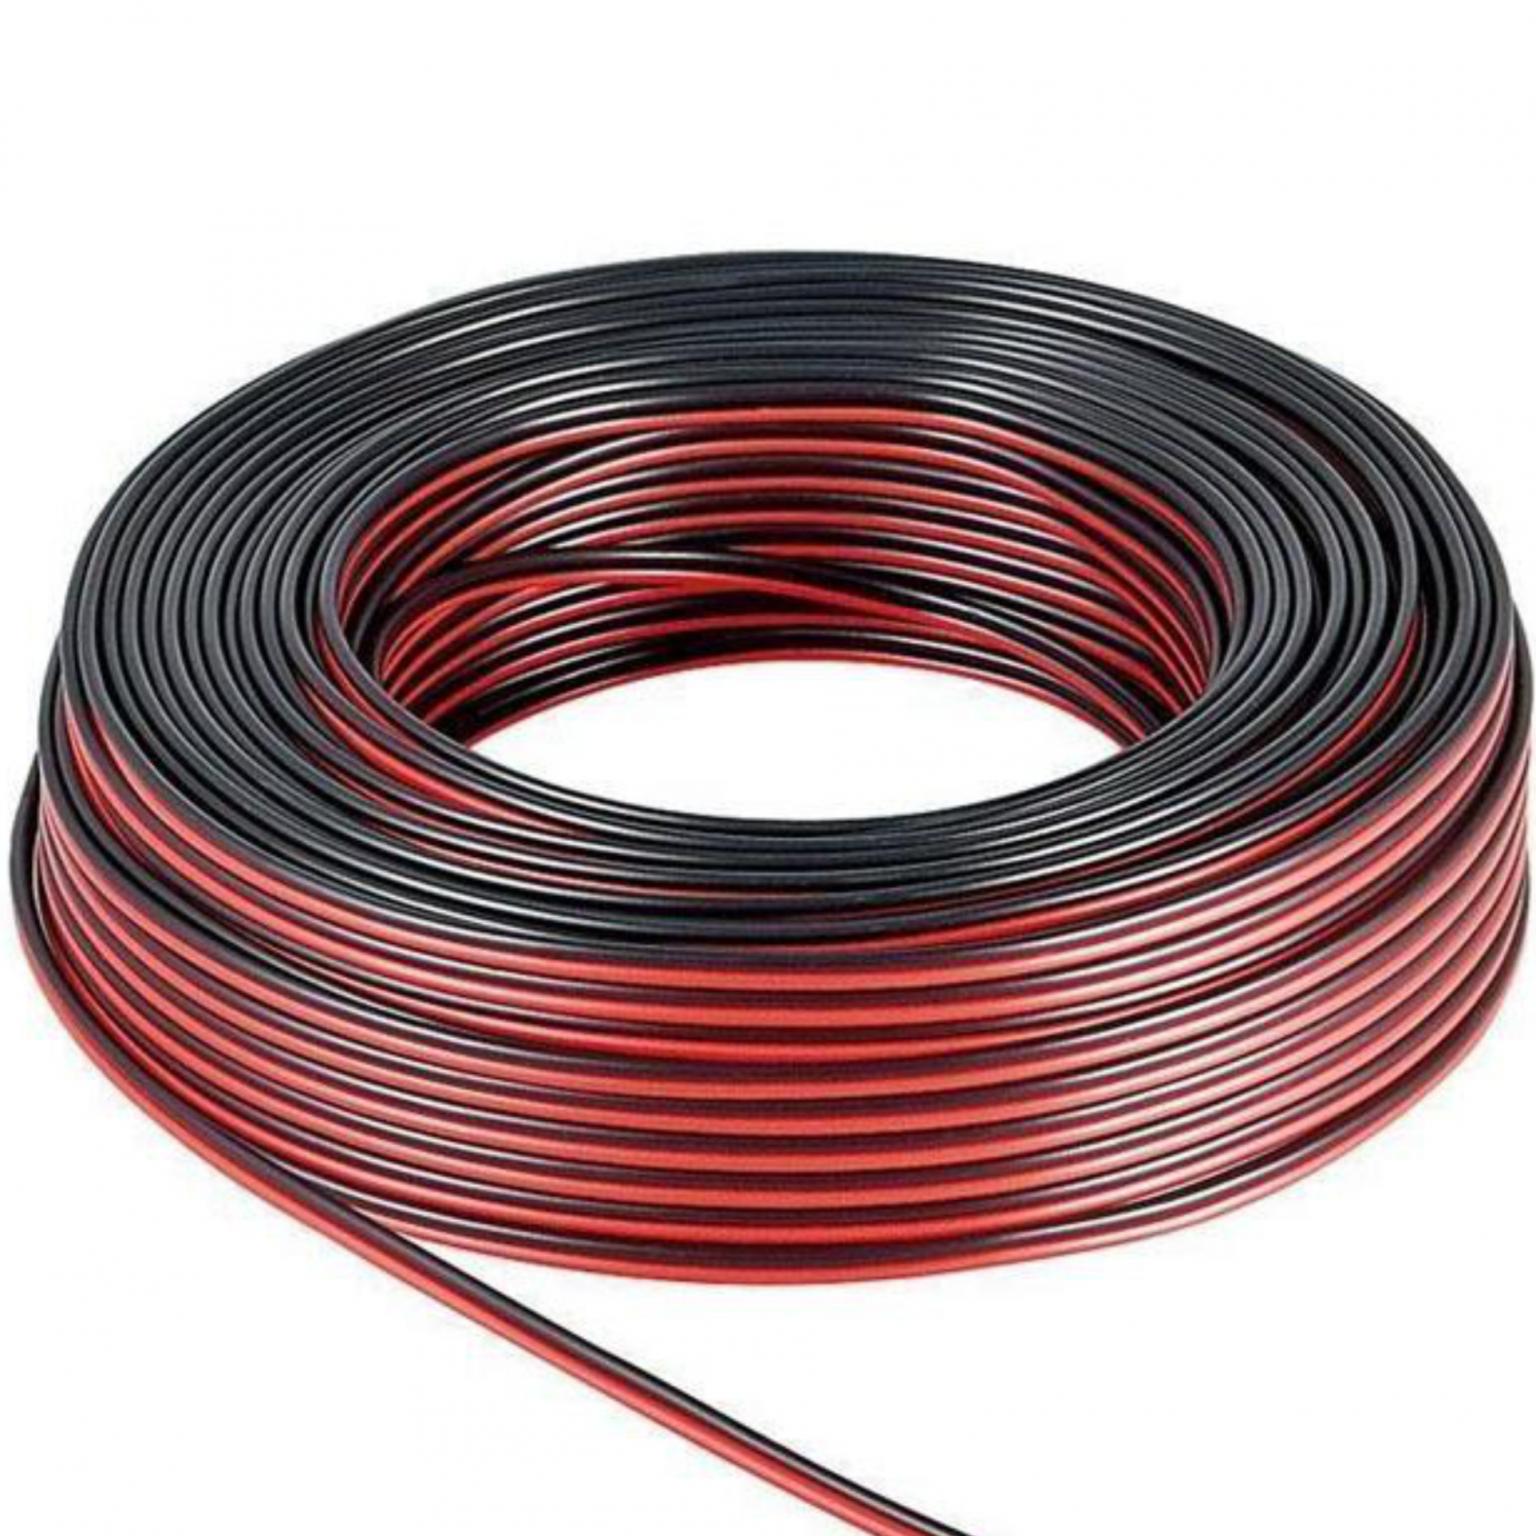 Image of Speaker cable red/black 25 m roll, cable diameter 2 x 2,5 mm? - Goobay